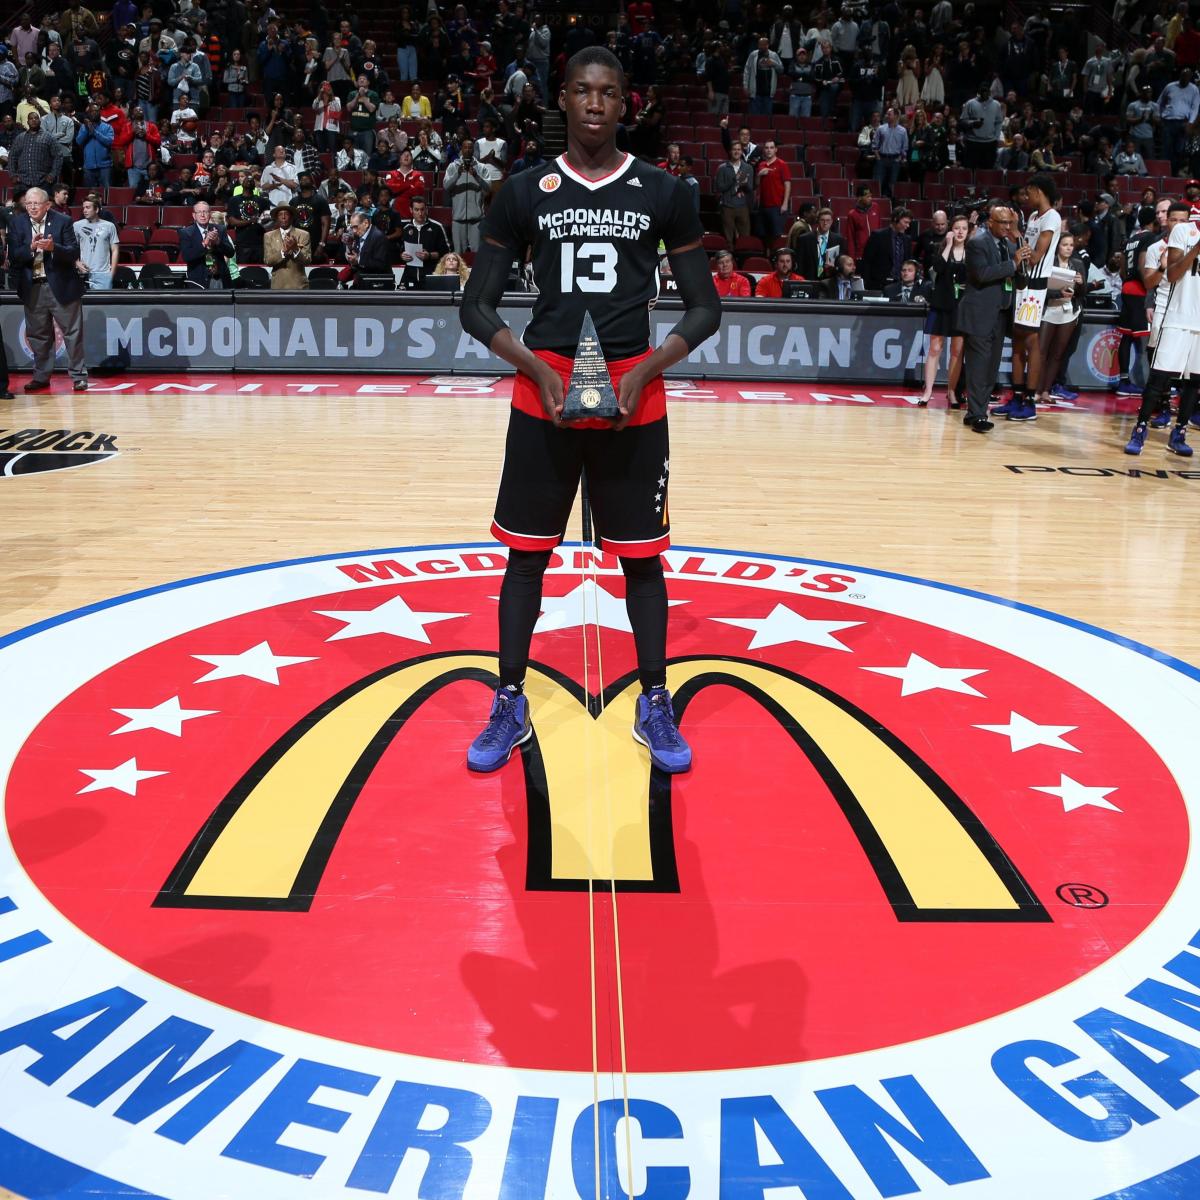 McDonald's AllAmerican Game 2015 Score, Top Performers and More